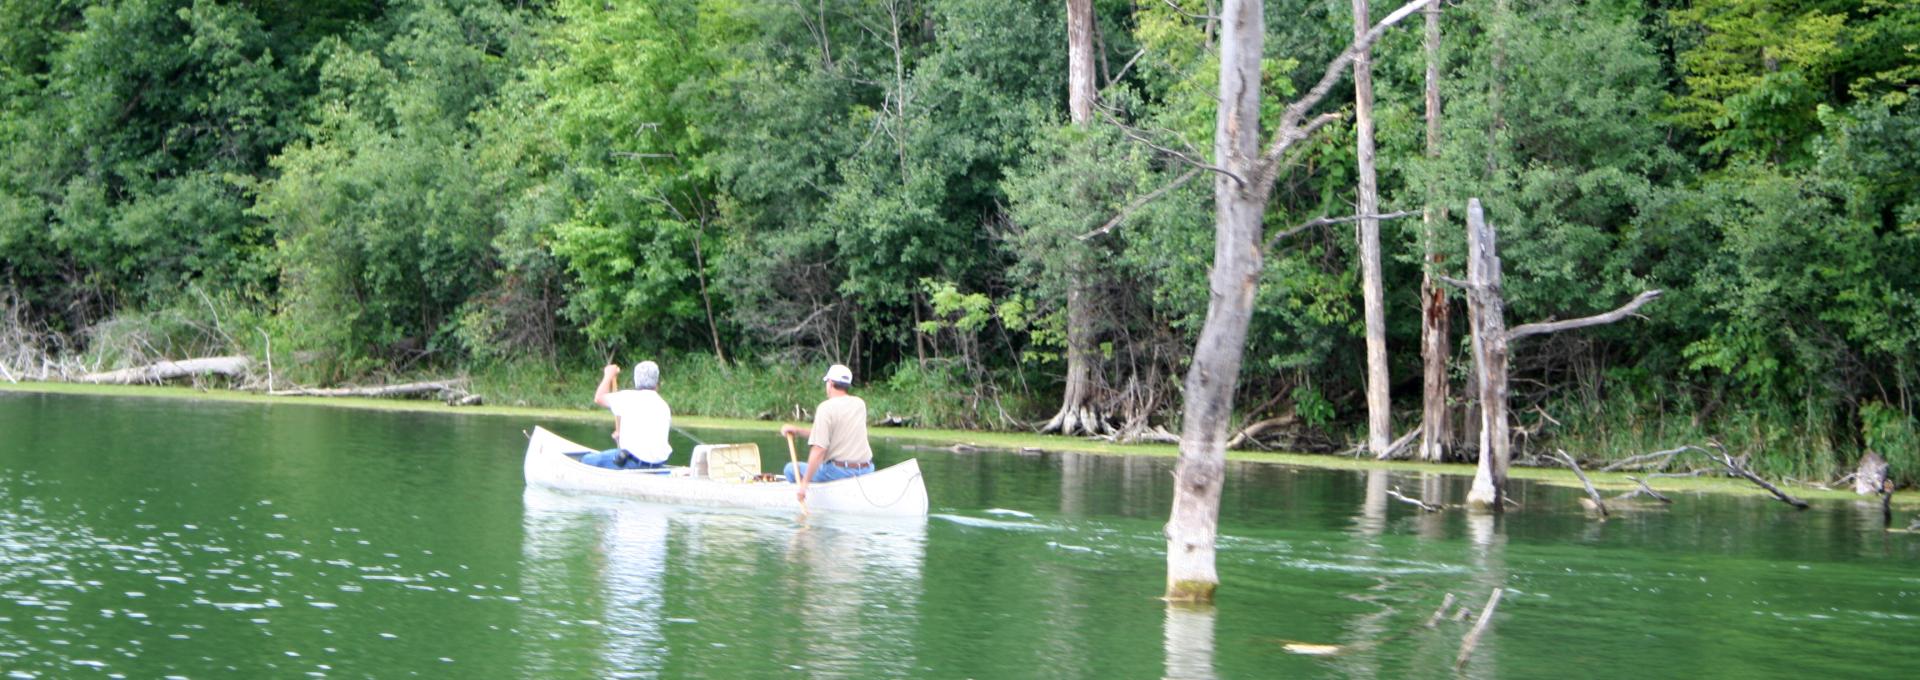 Two men canoeing at Chester Woods park